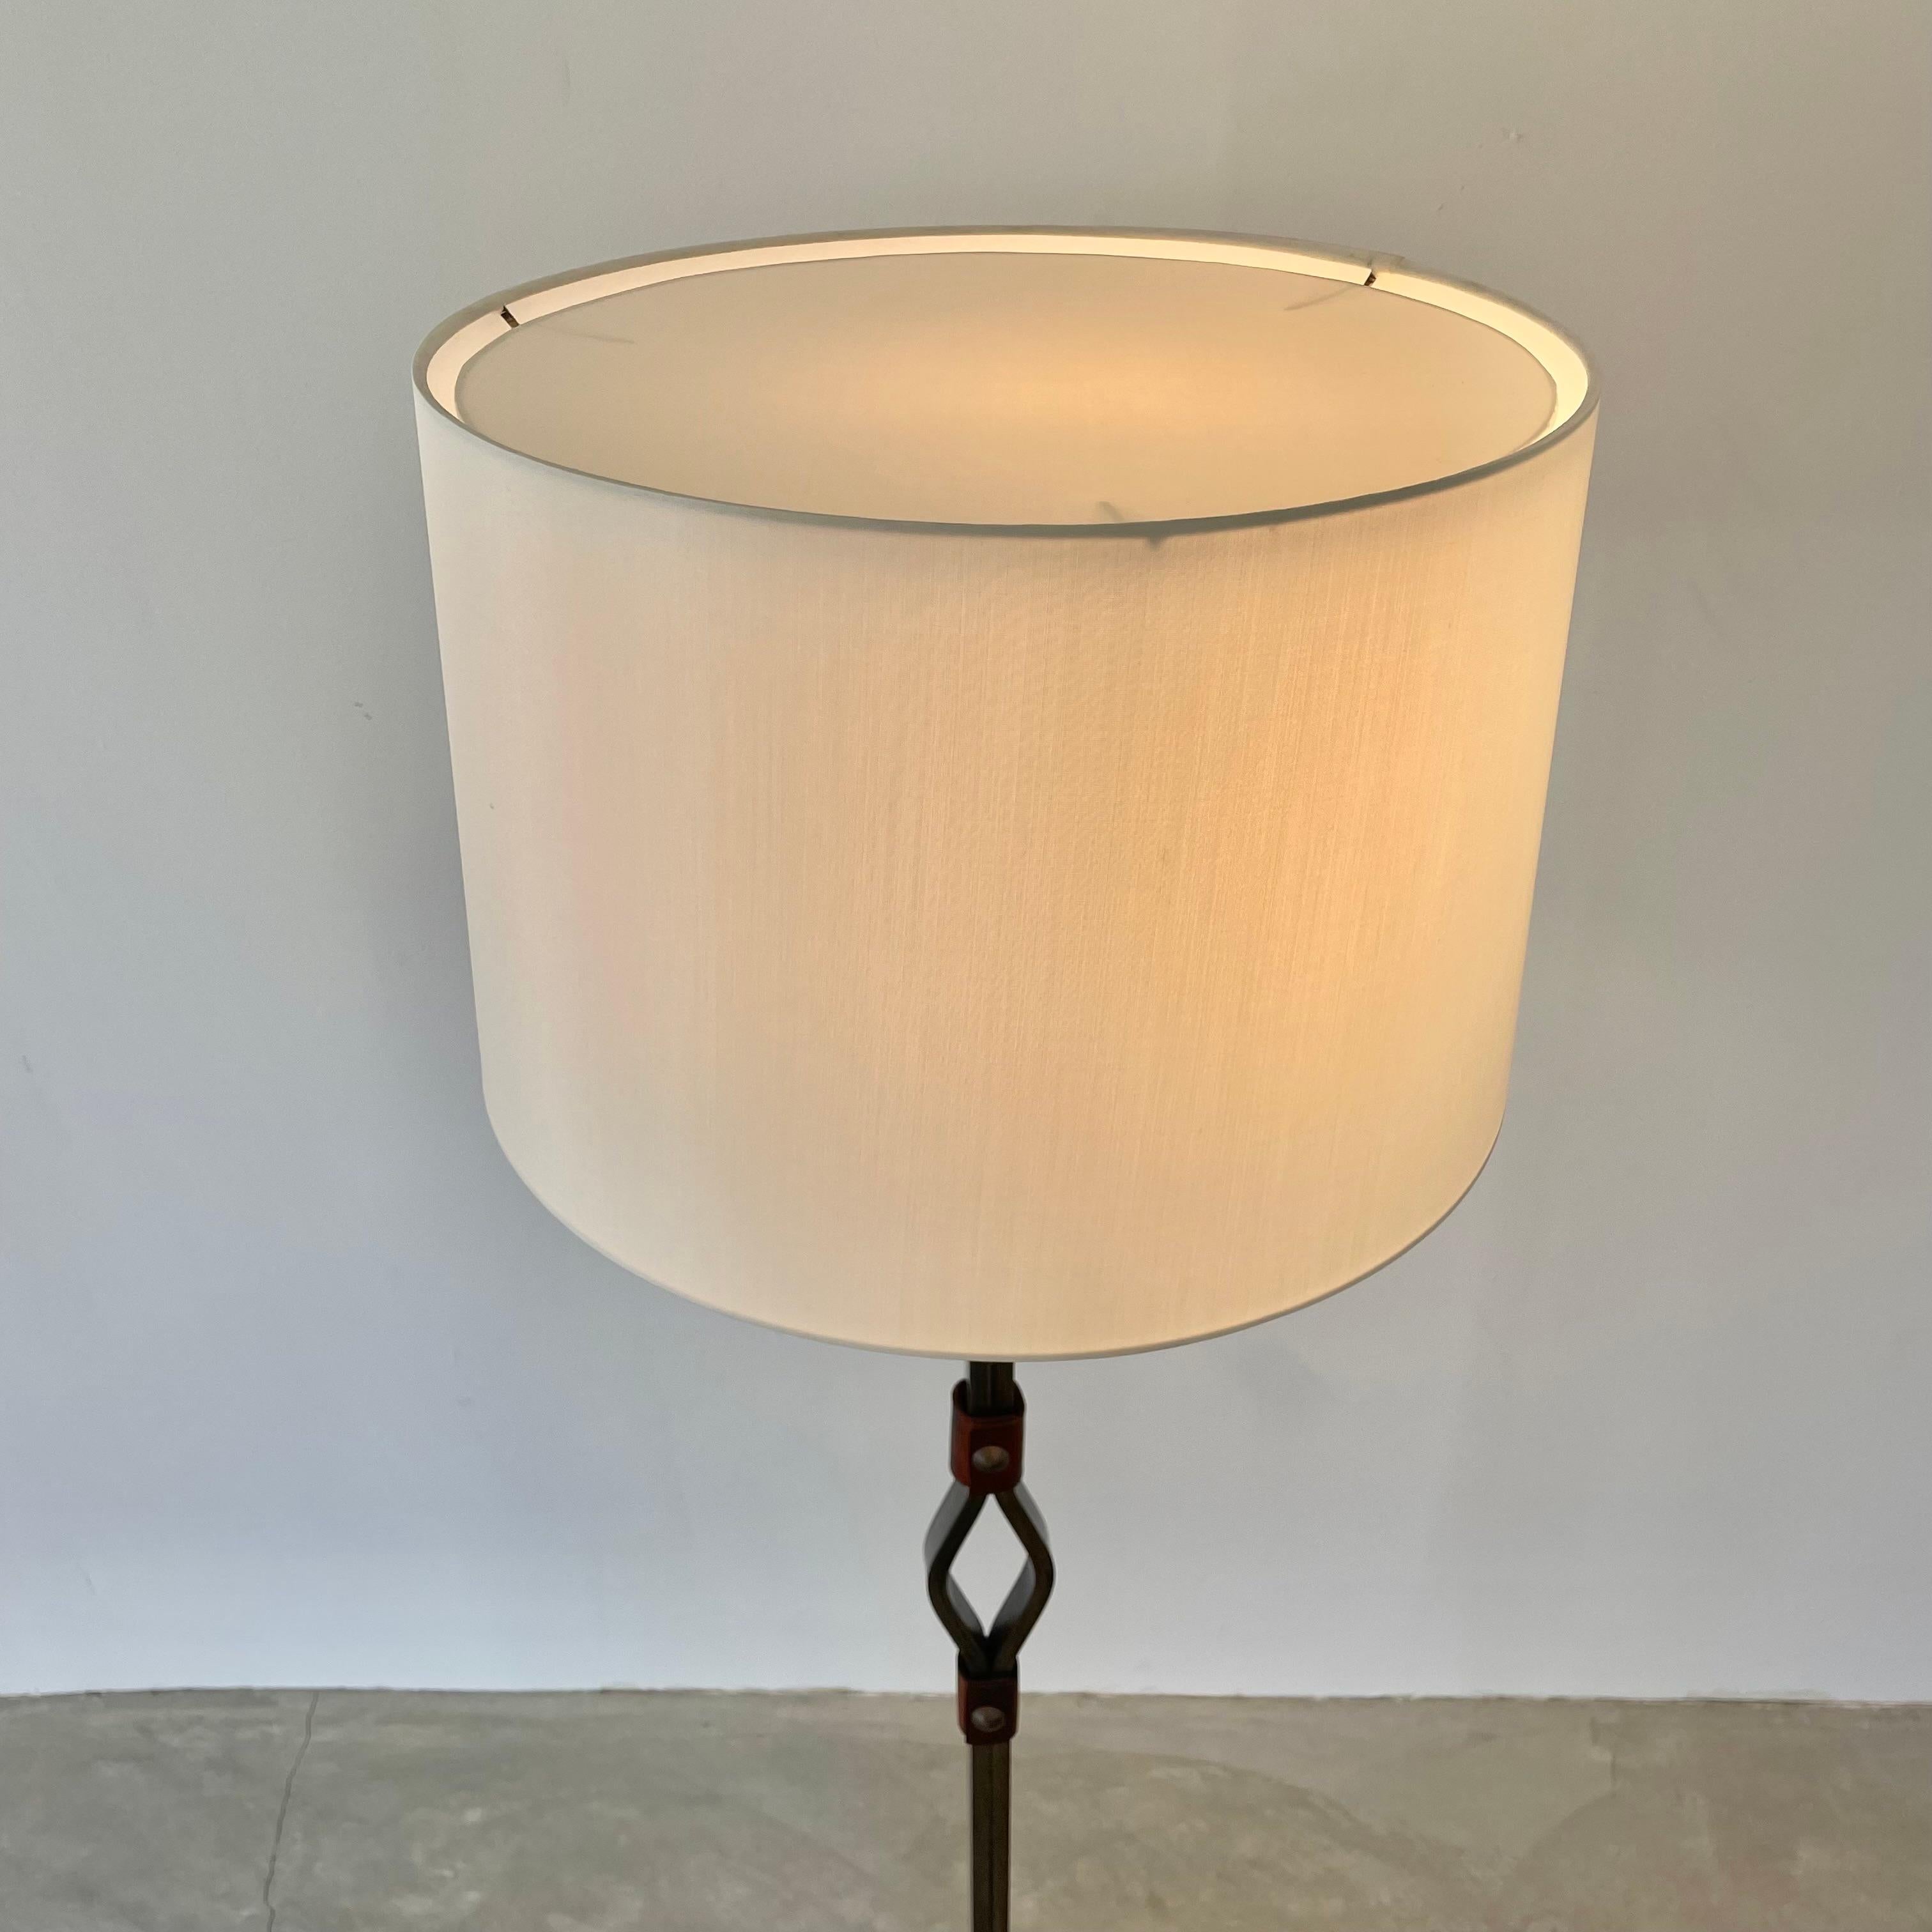 Jacques Adnet Steel and Leather Floor Lamp, 1950s France For Sale 4